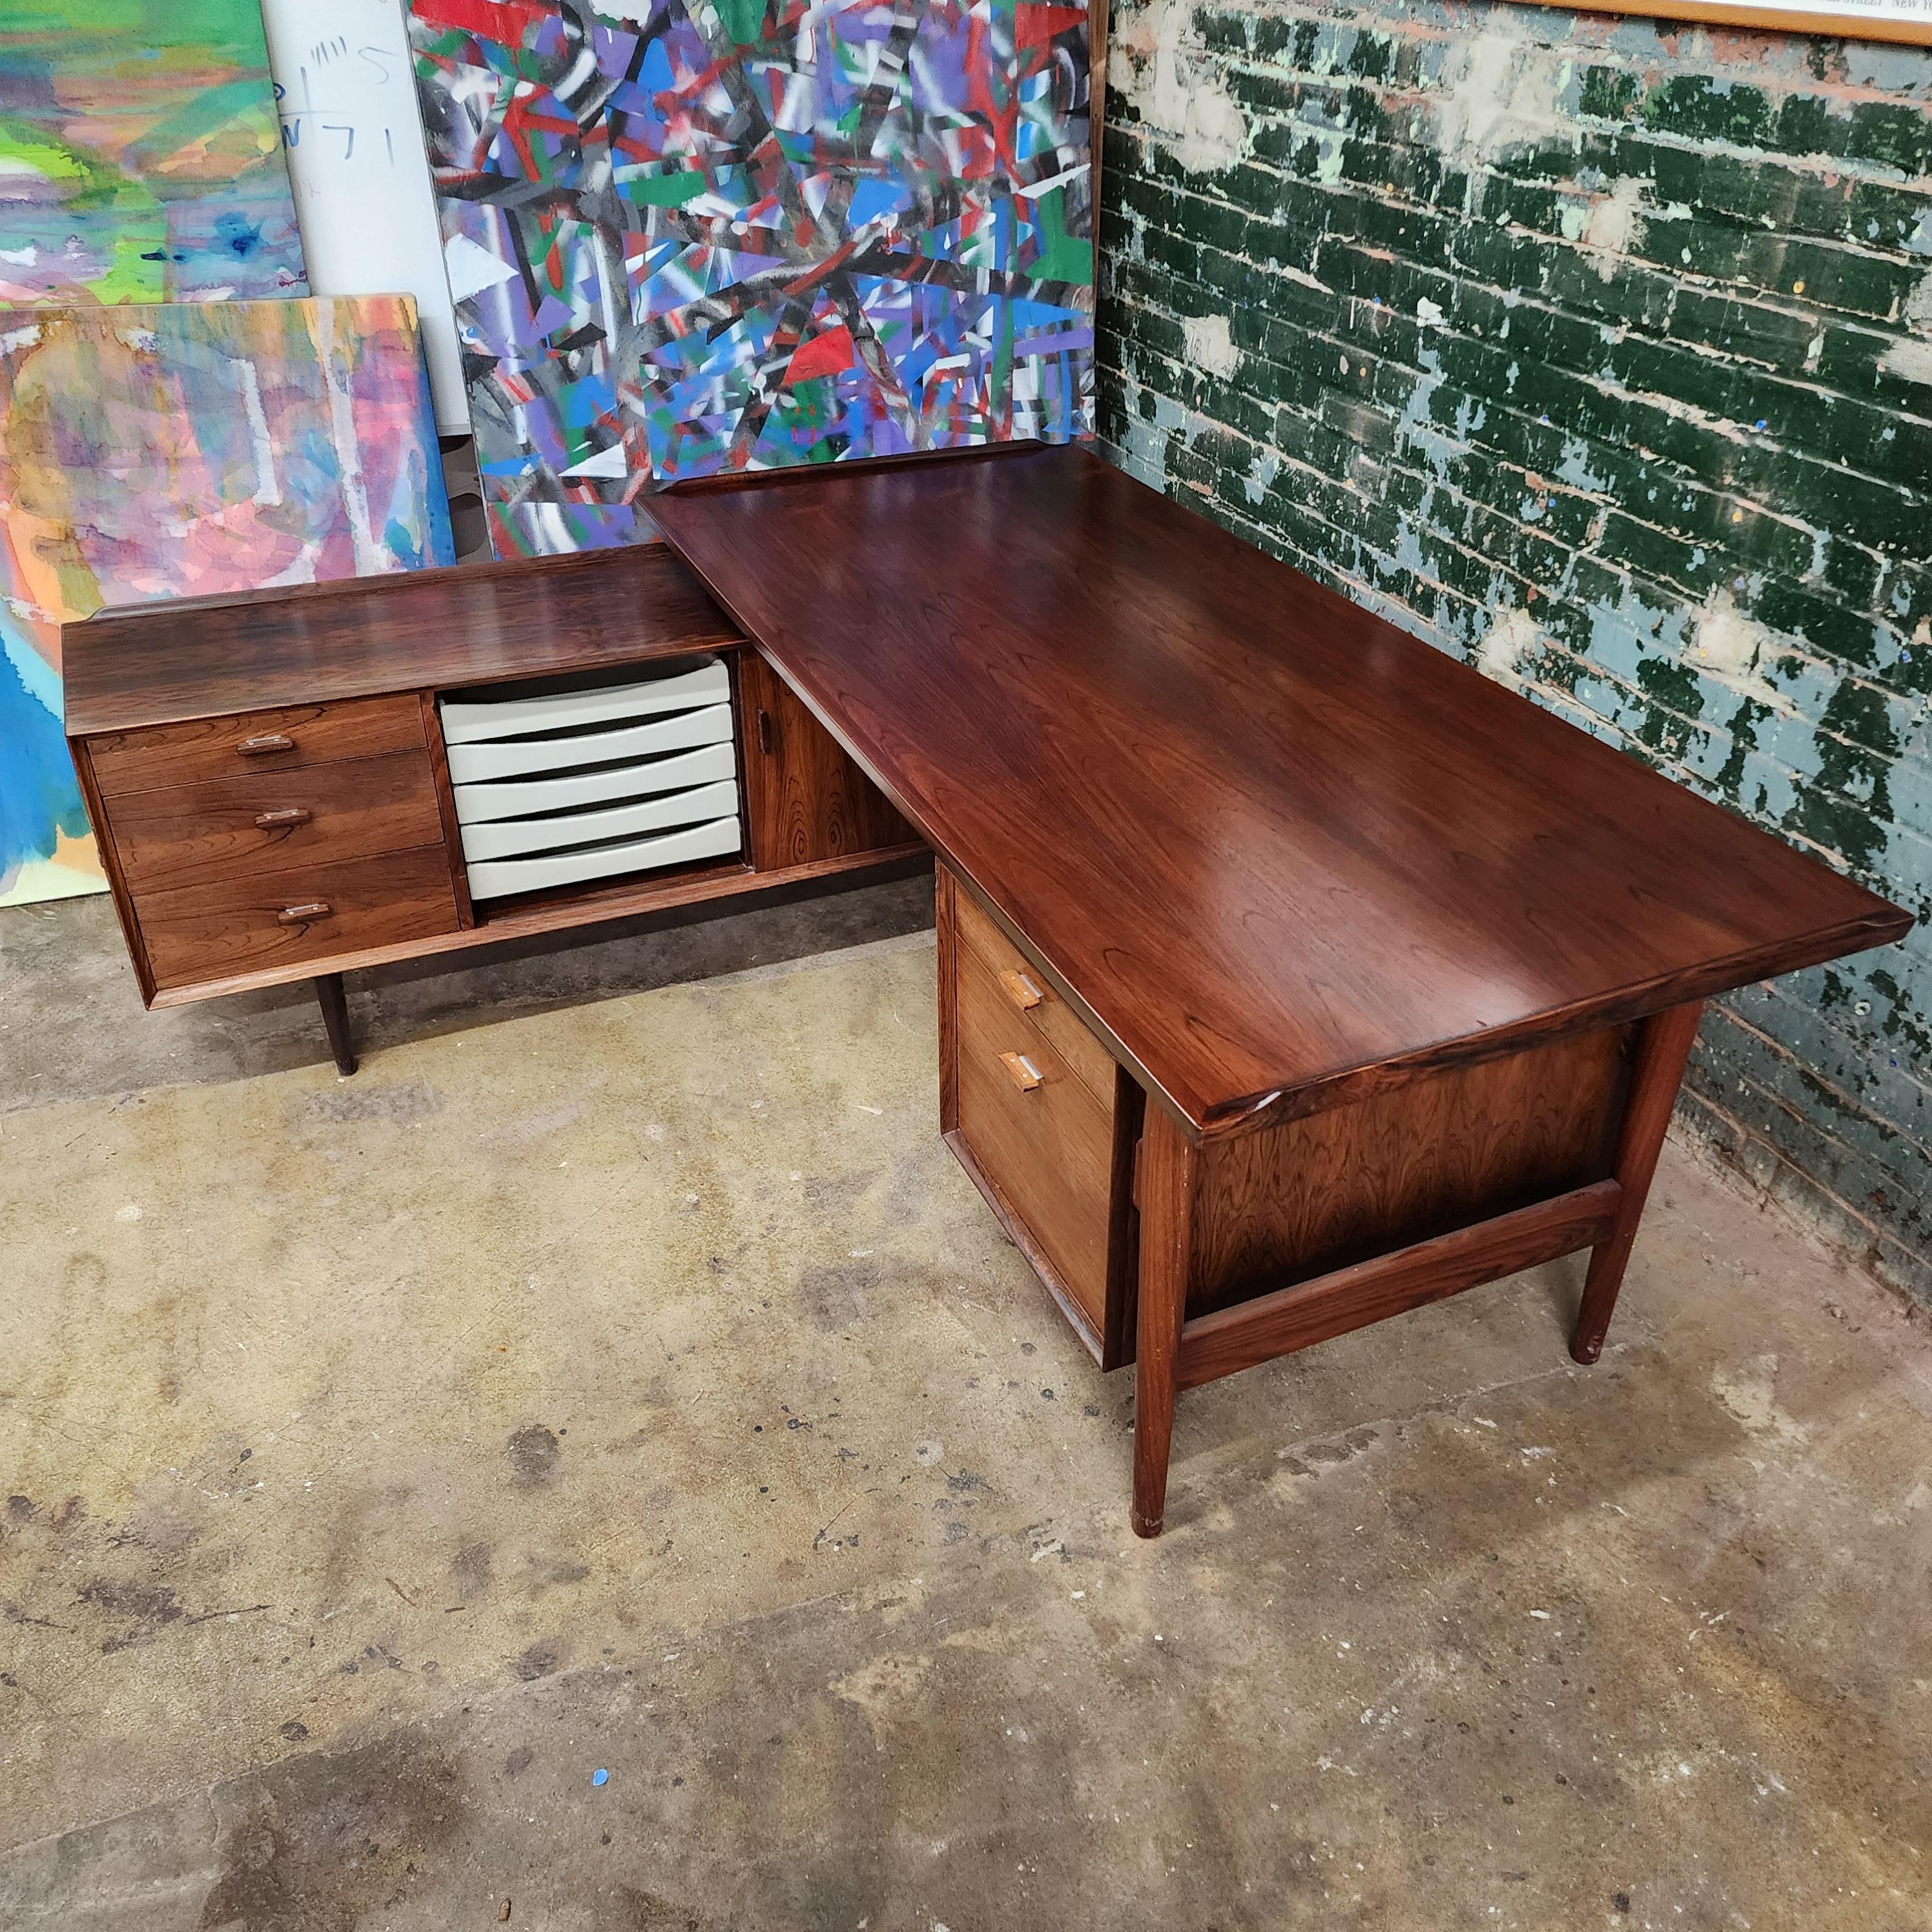 The Rosewood Model 208 Desk by arne Vodder for Sibast. Crafted with precision and elegance, this desk is a true testament to the timeless beauty and functional excellence that characterizes mid-century modern furniture.

Designed by the renowned